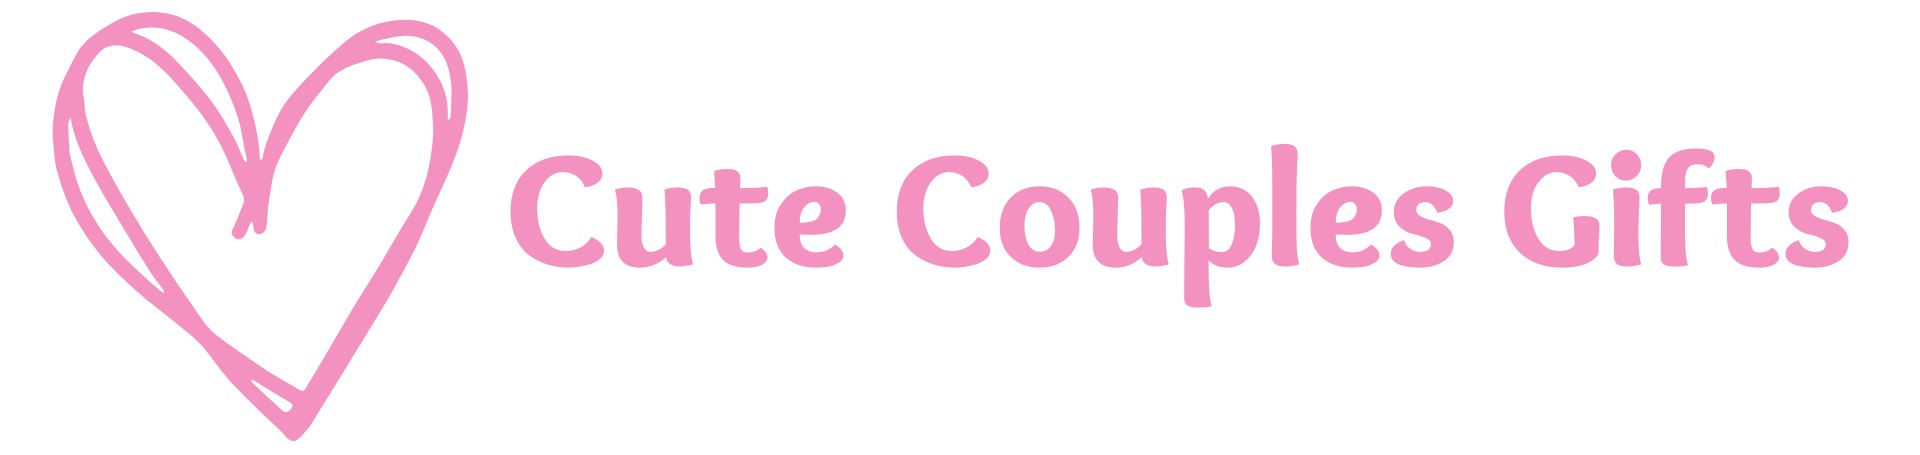 Cute Couples Gifts